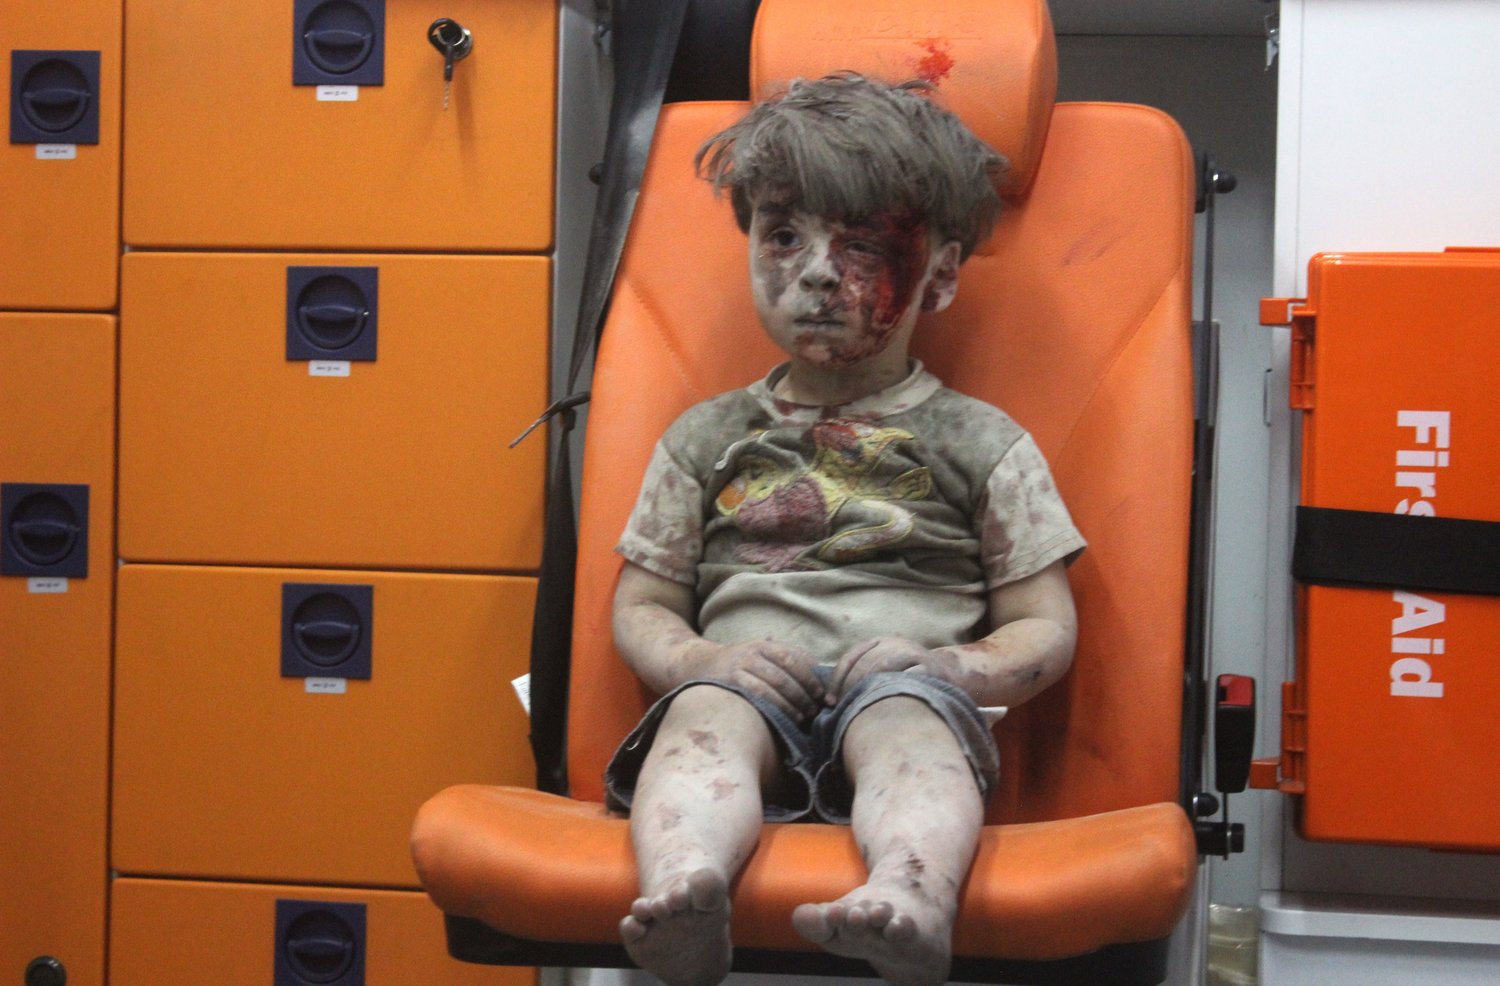 Omran and Alan: The Limits of the Photo of the Wounded Aleppo Boy